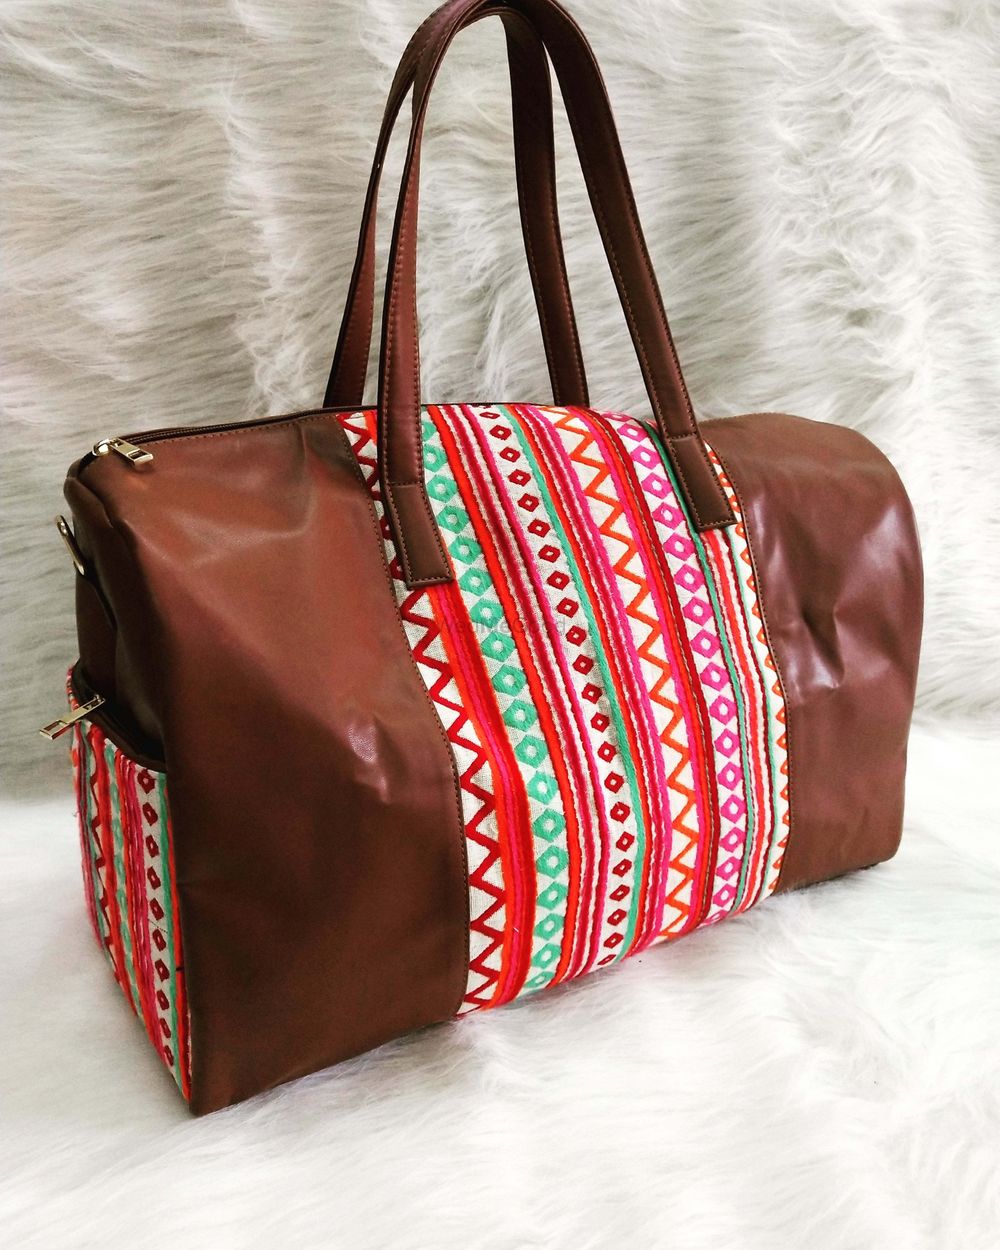 Photo From duffle bags - By Armcandy Handbags and More